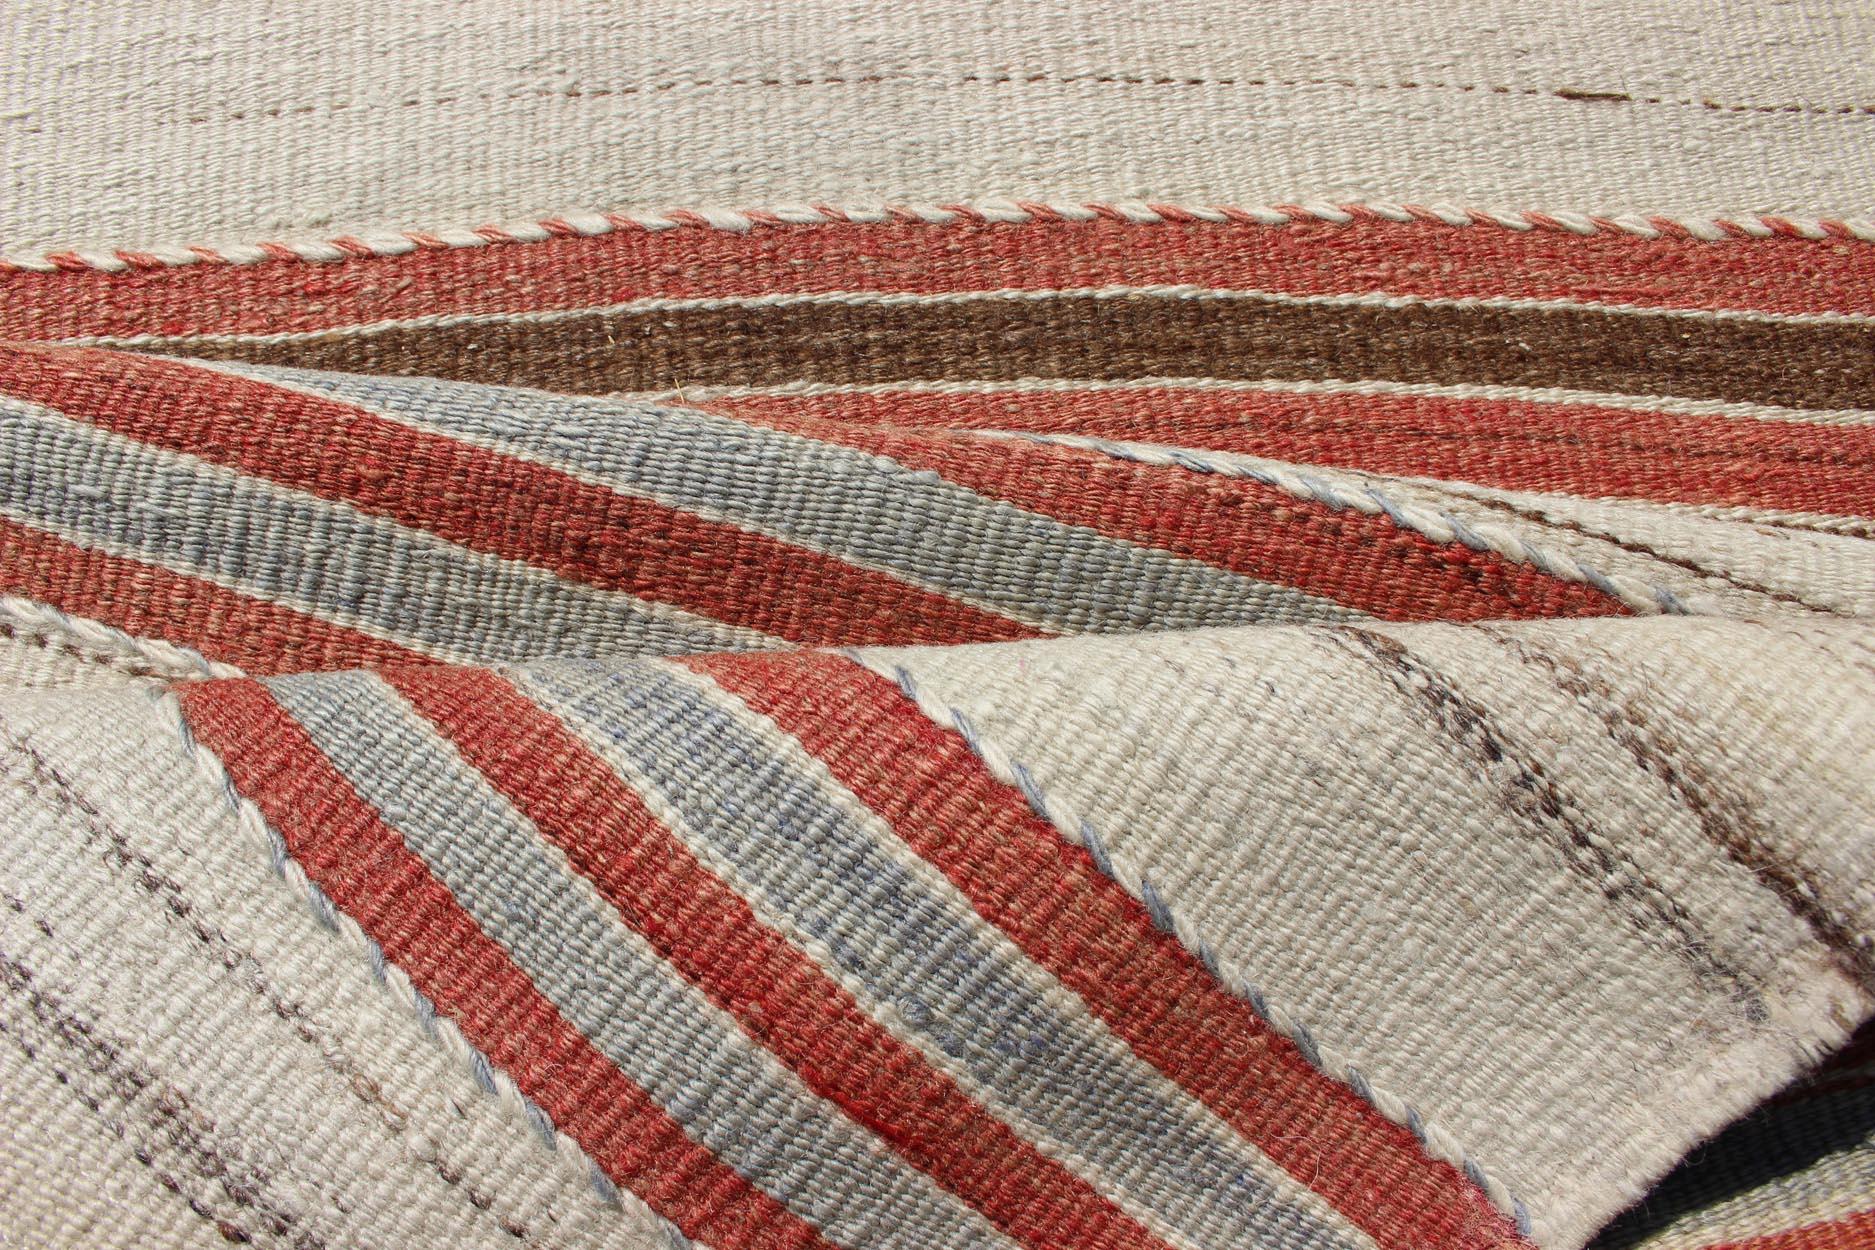 Striped Turkish Vintage Kilim Flat-Weave Rug in Shades of Red, Brown, and Ivory 3